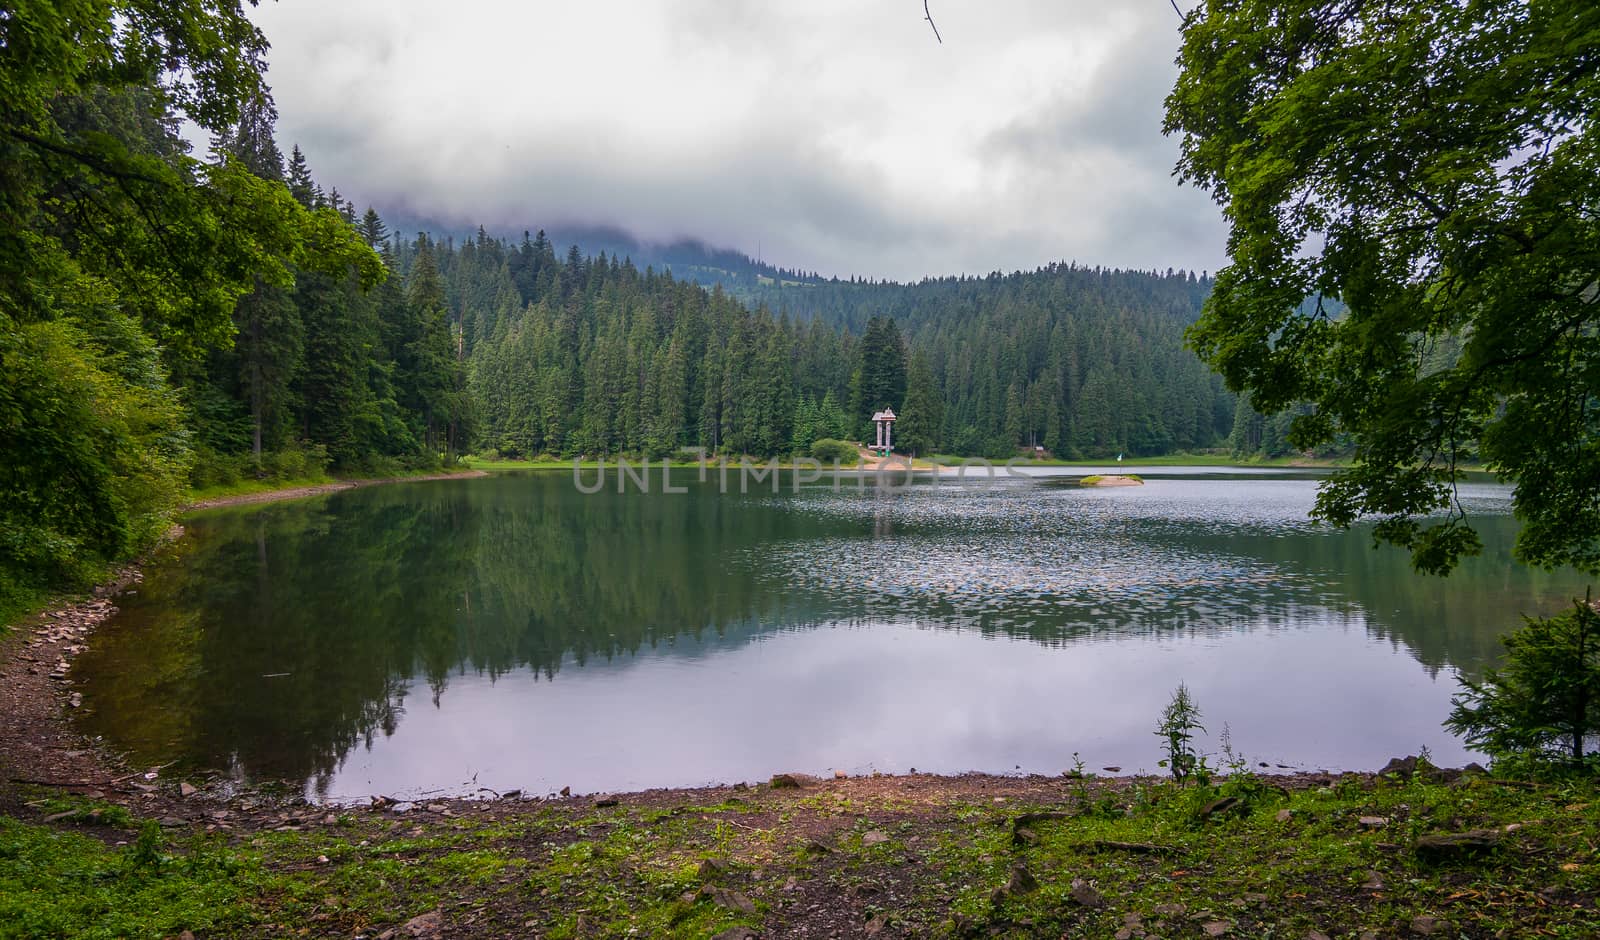 A small lake located among a high dense forest with creeping clouds over the treetops by Adamchuk